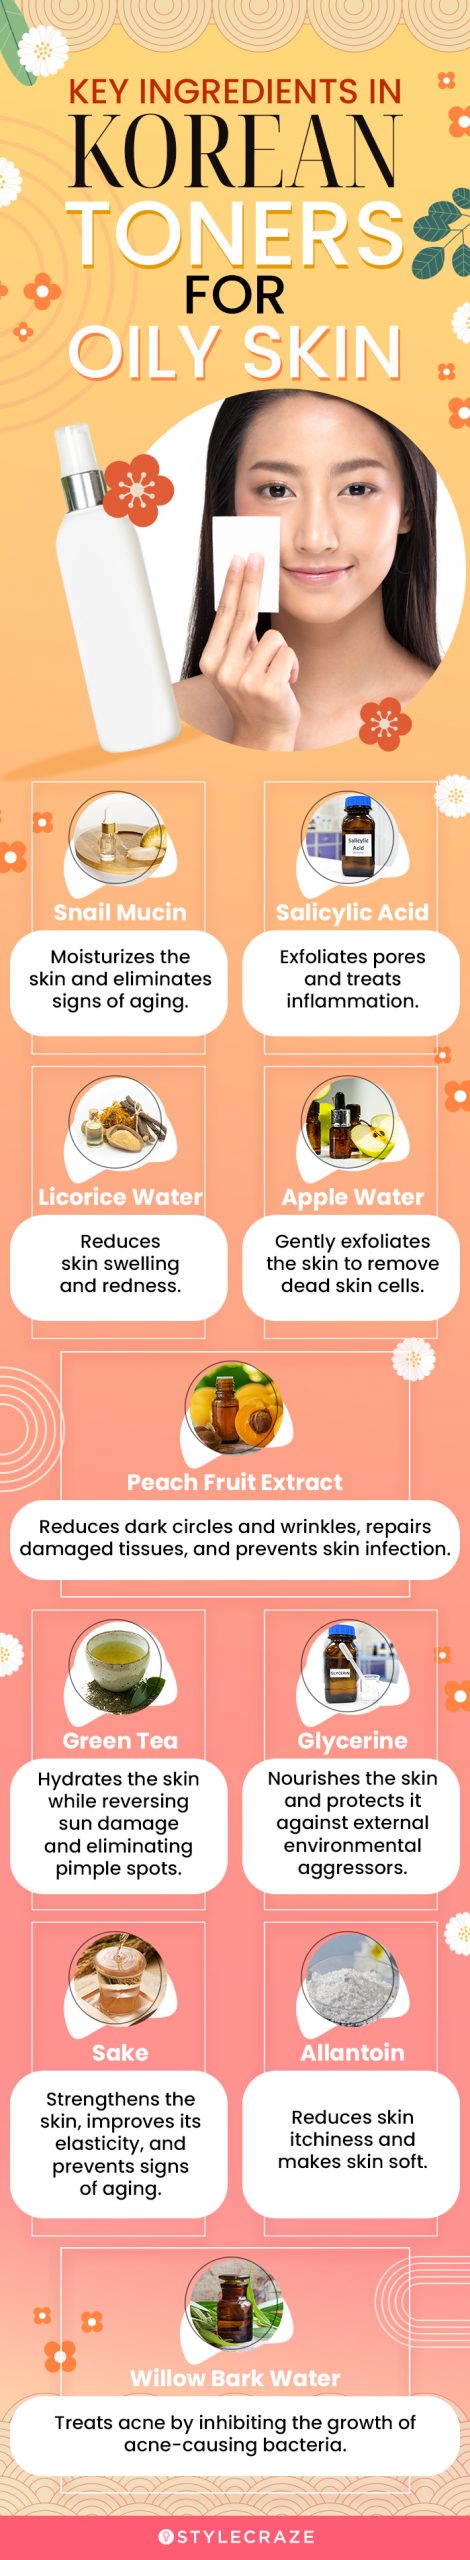 Key Ingredients In Korean Toners For Oily Skin (infographic)